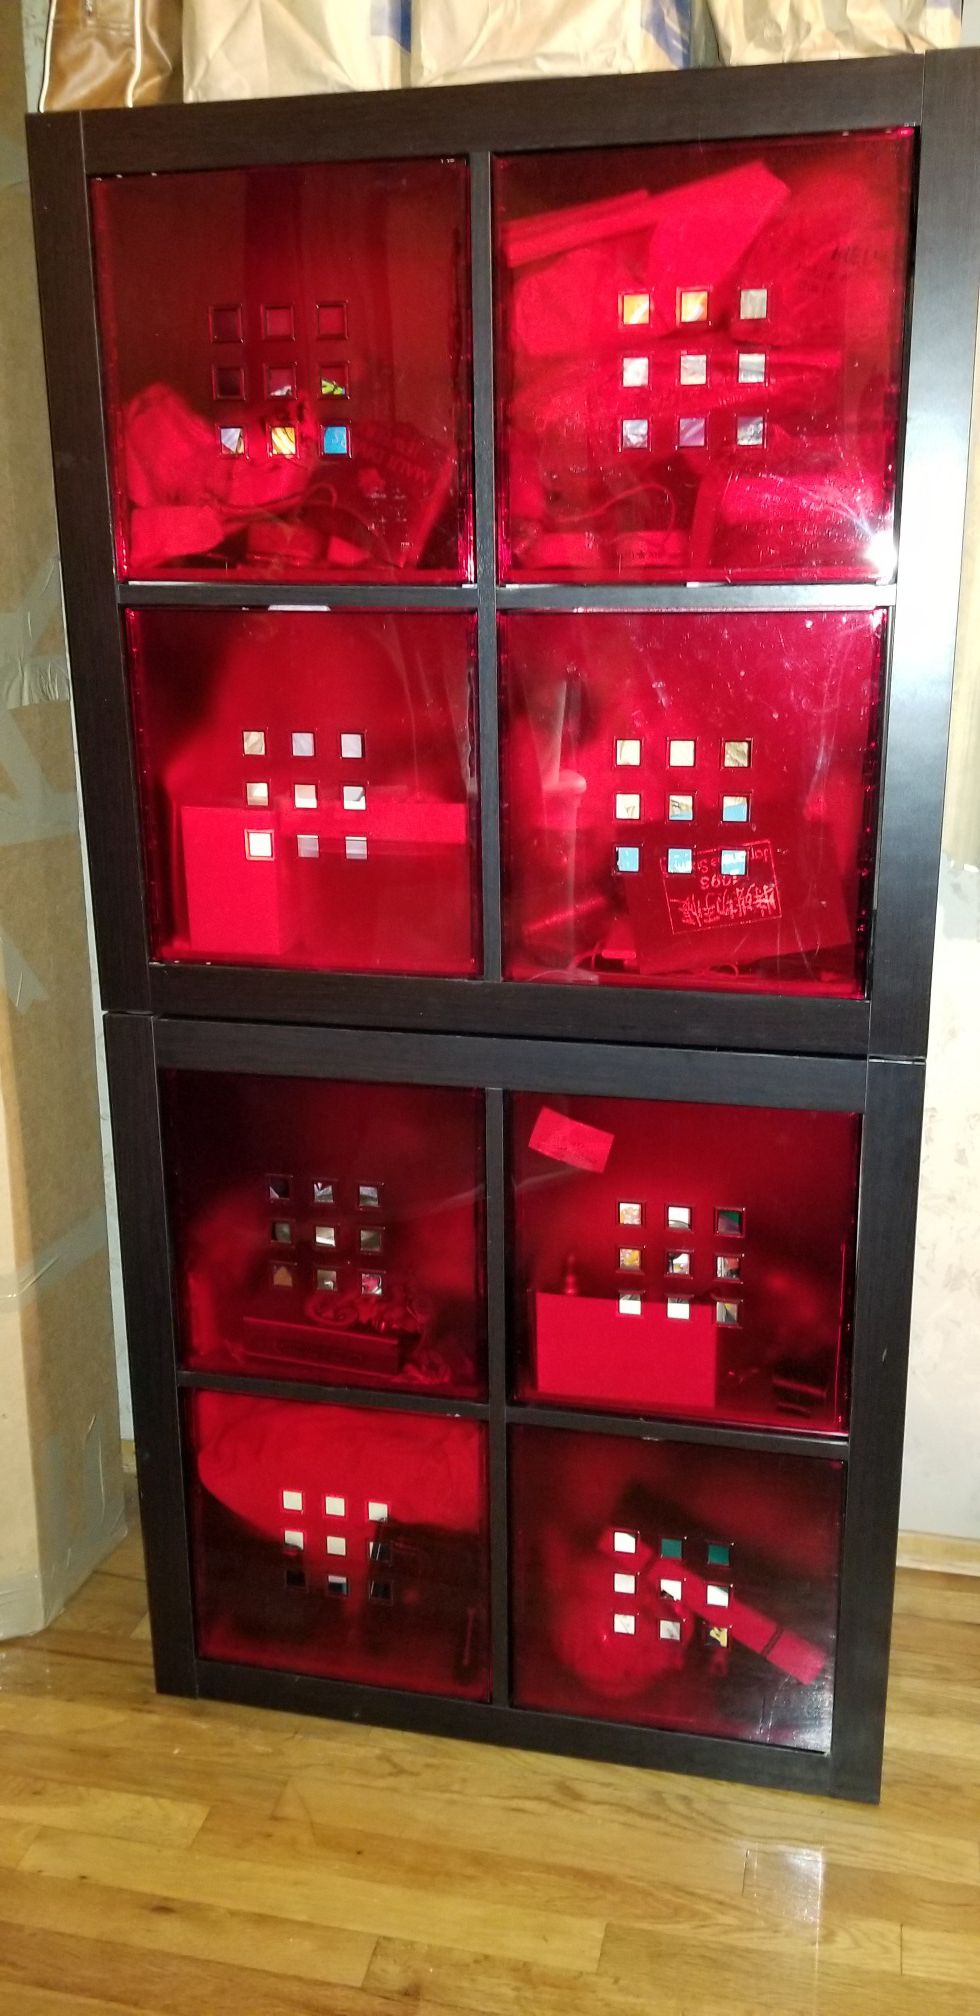 Two 4 Opening Shelving Units with Red Organizing Boxes